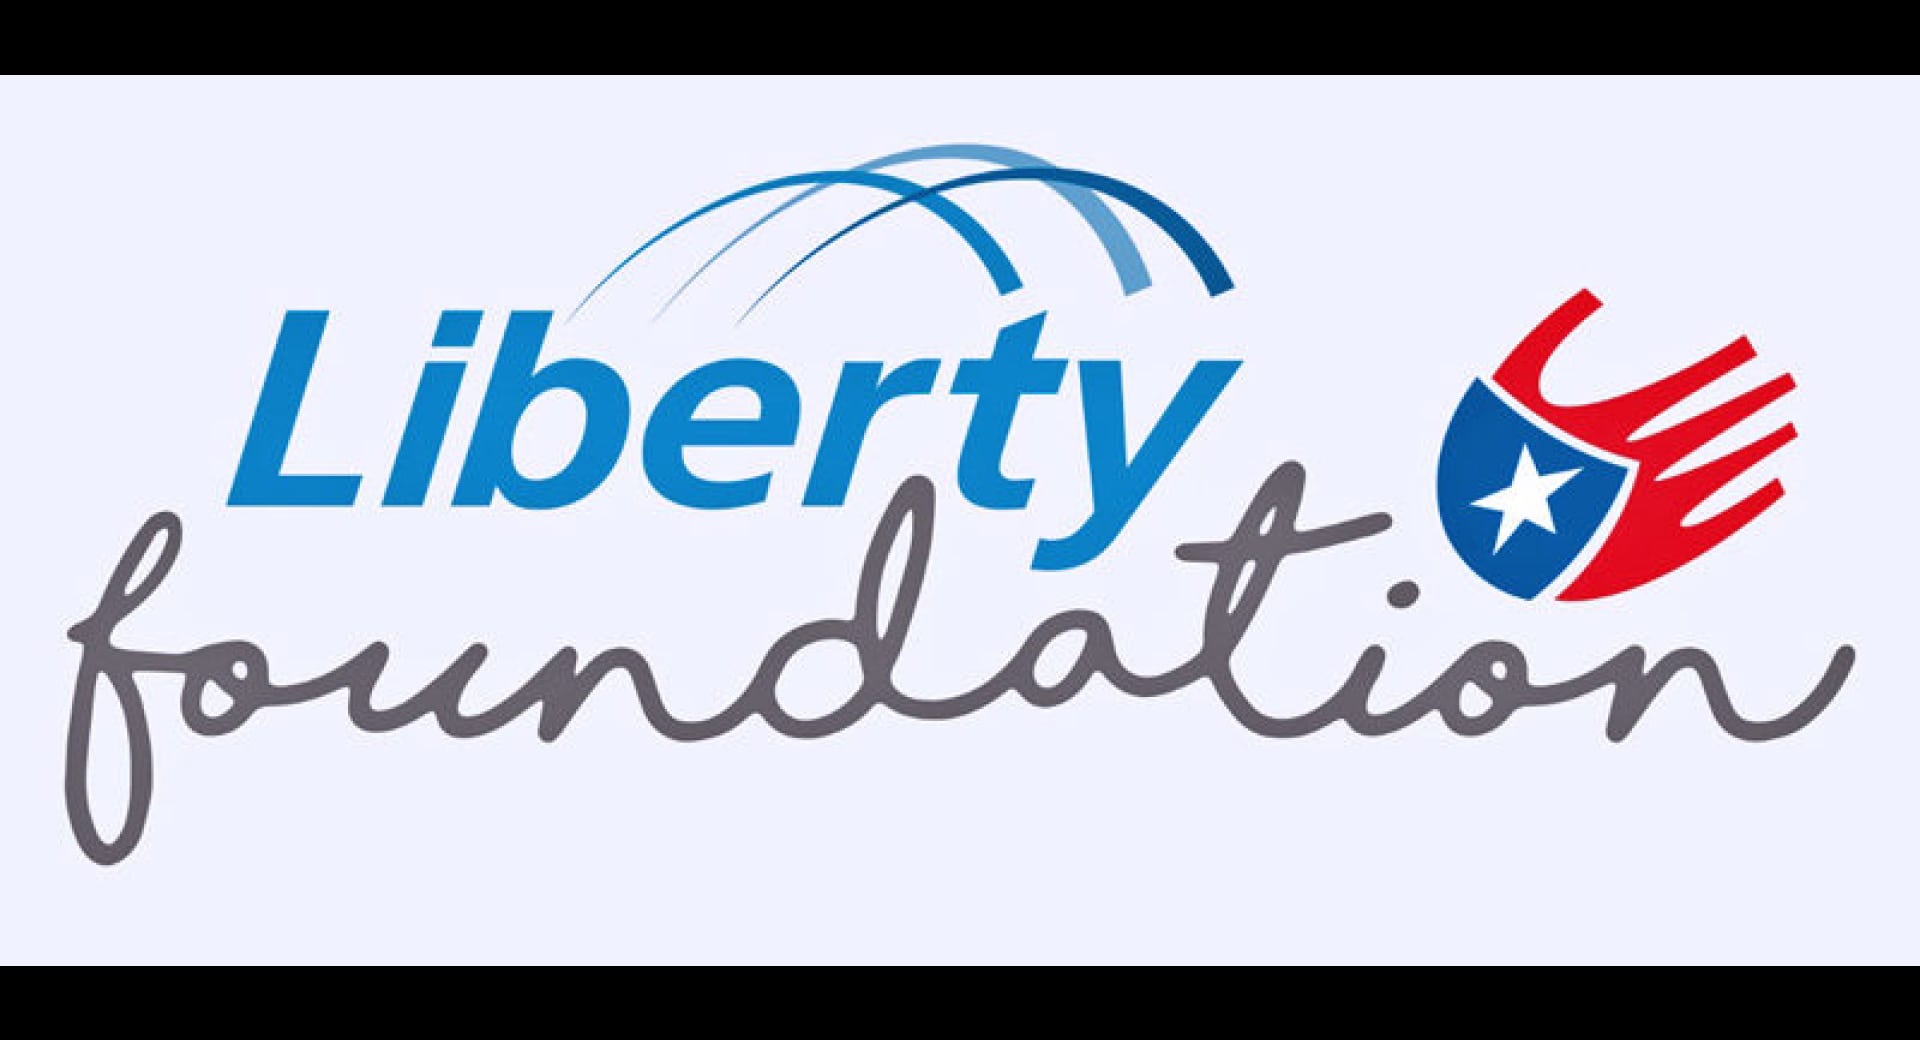 CFVI Receives $50,000 Grant from Liberty Foundation